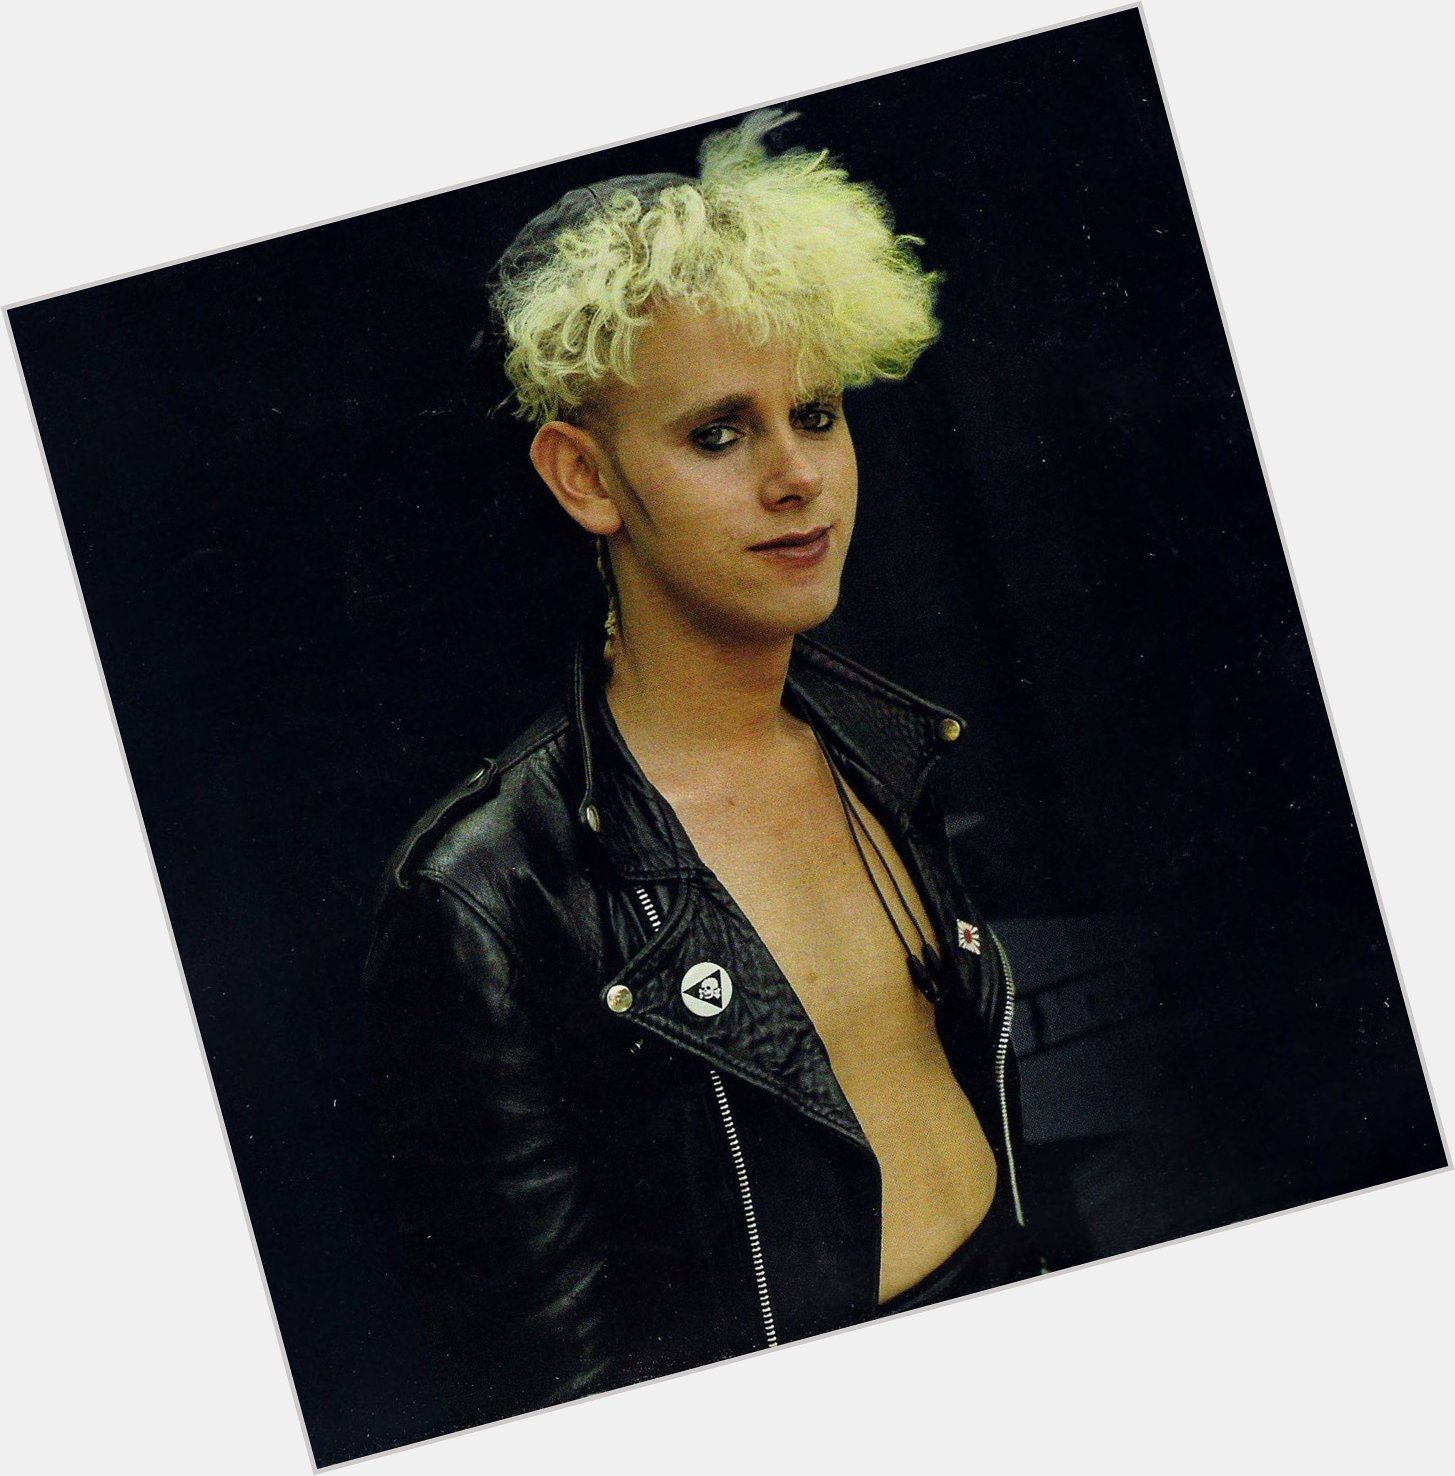 Happy birthday to \s Martin Gore, who is 58 today! 